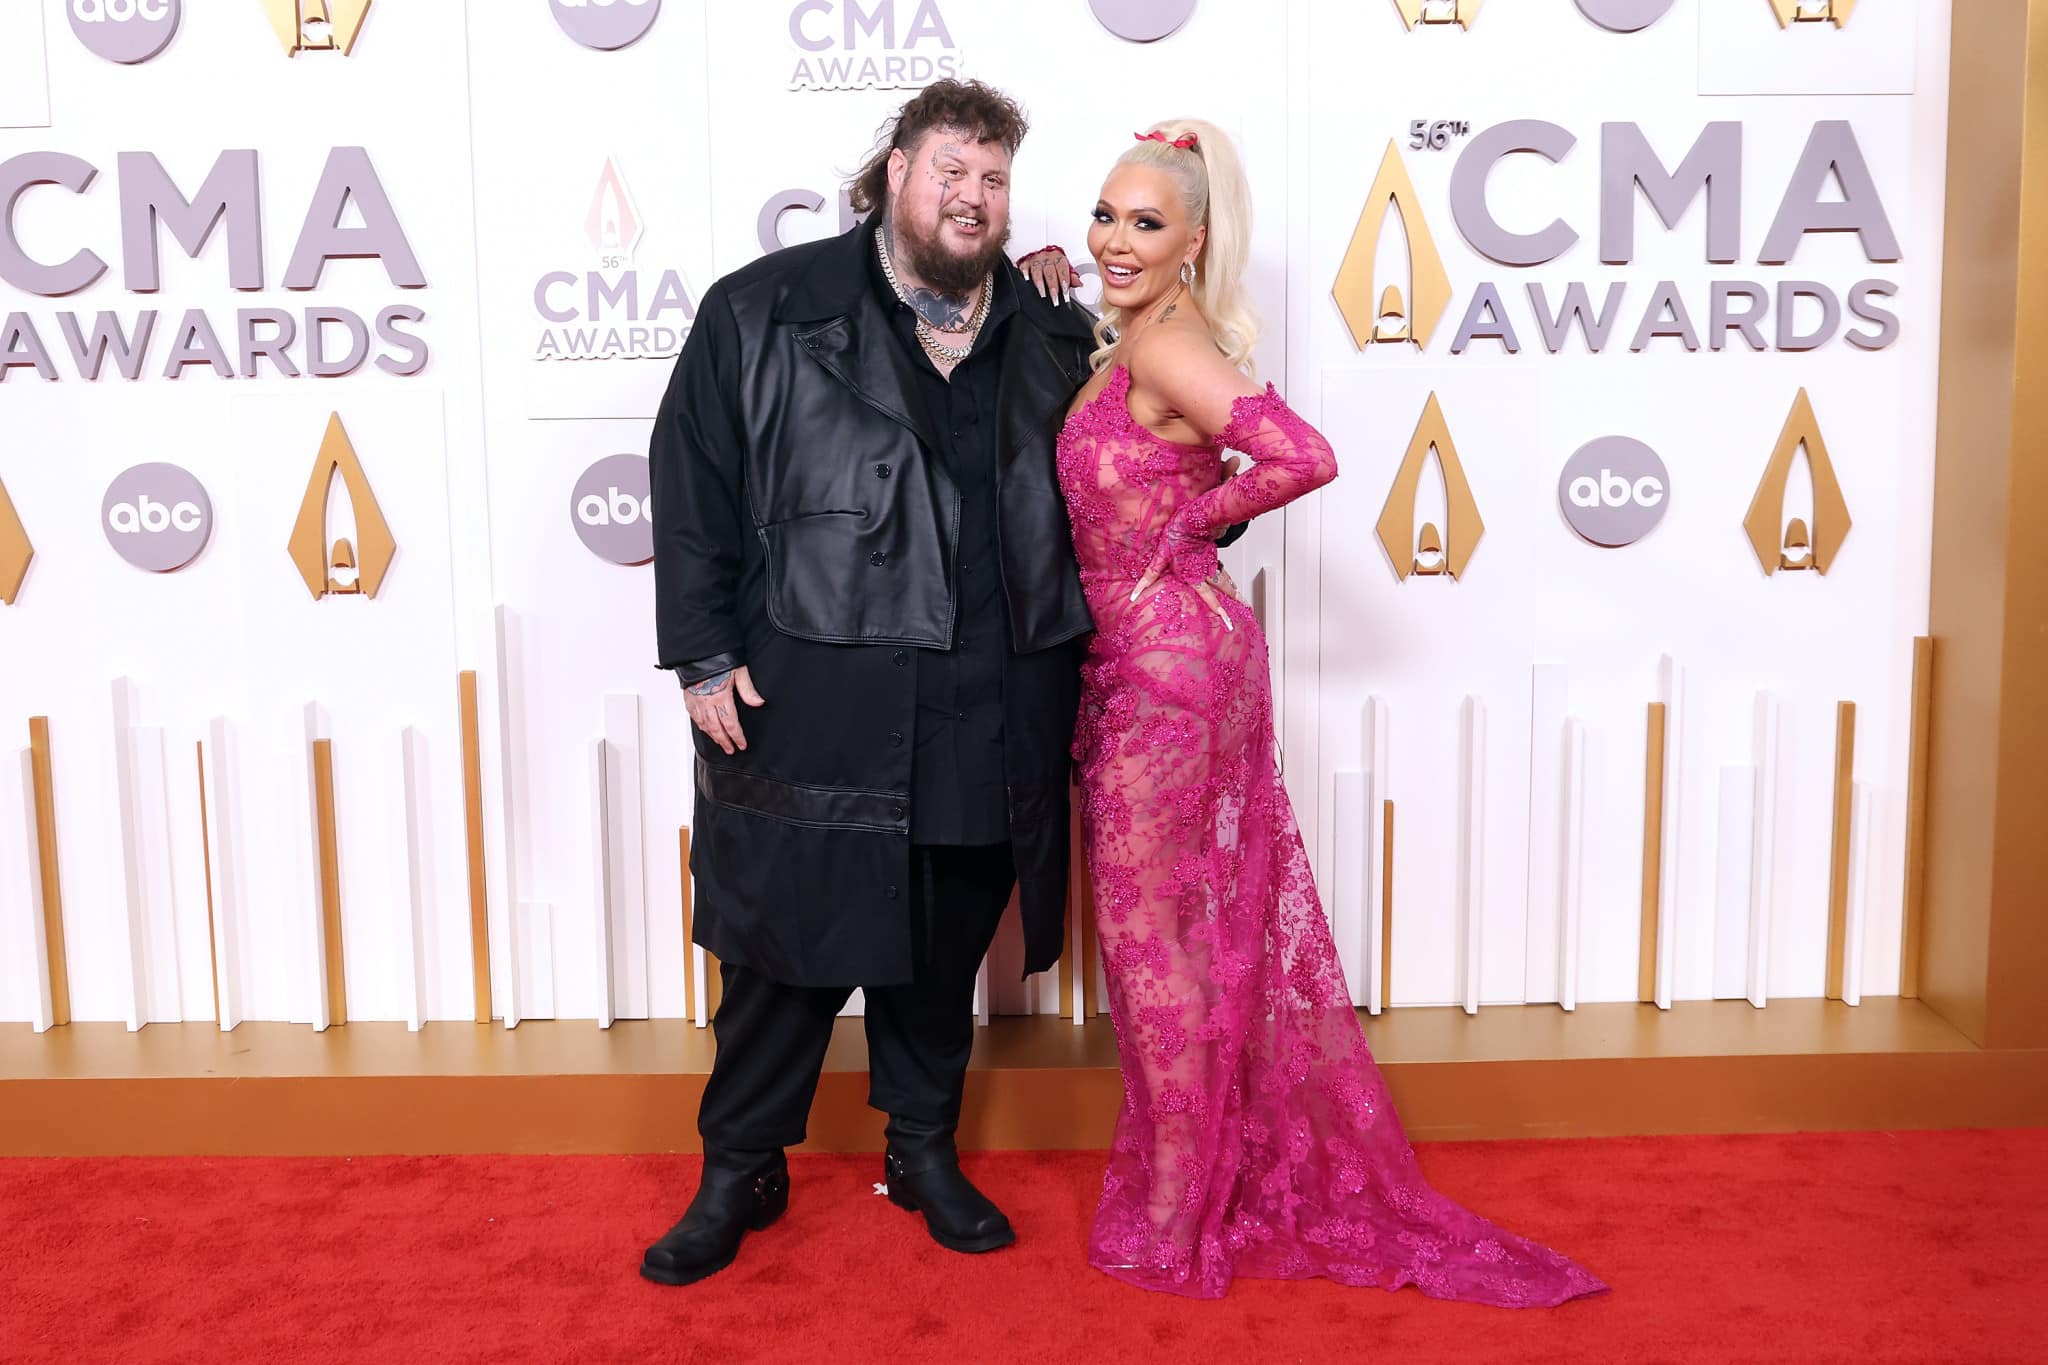 NASHVILLE, TENNESSEE - NOVEMBER 09: Jelly Roll and Bunnie Xo attend the 56th Annual CMA Awards at Bridgestone Arena on November 09, 2022 in Nashville, Tennessee. (Photo by Taylor Hill/FilmMagic)